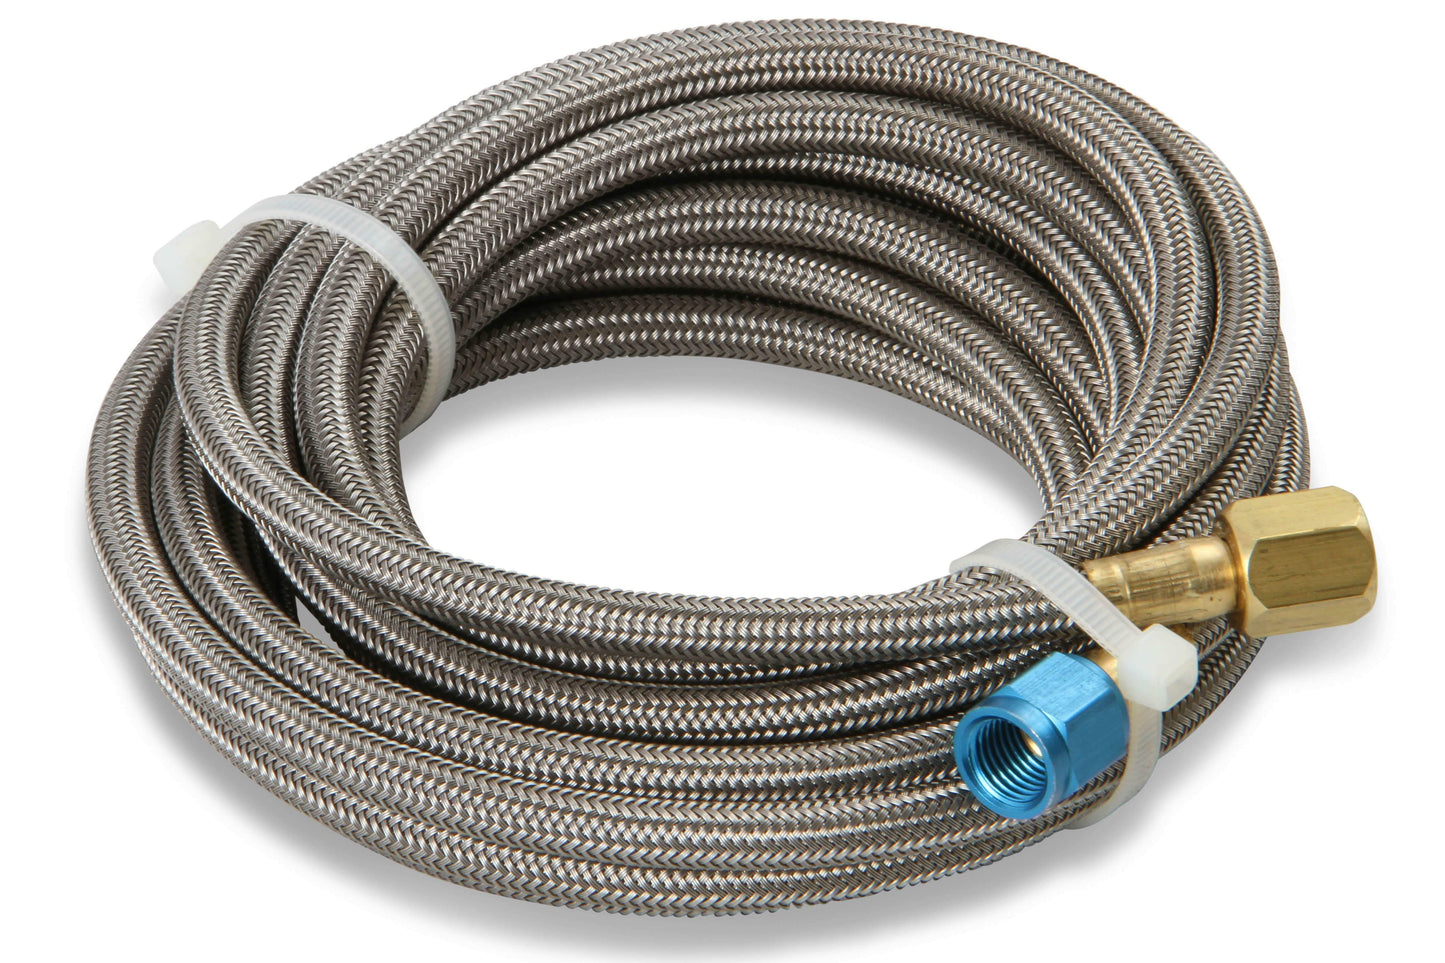 NOS 15295NOS NOS Stainless Steel Braided Hose -4AN 14-foot Blue